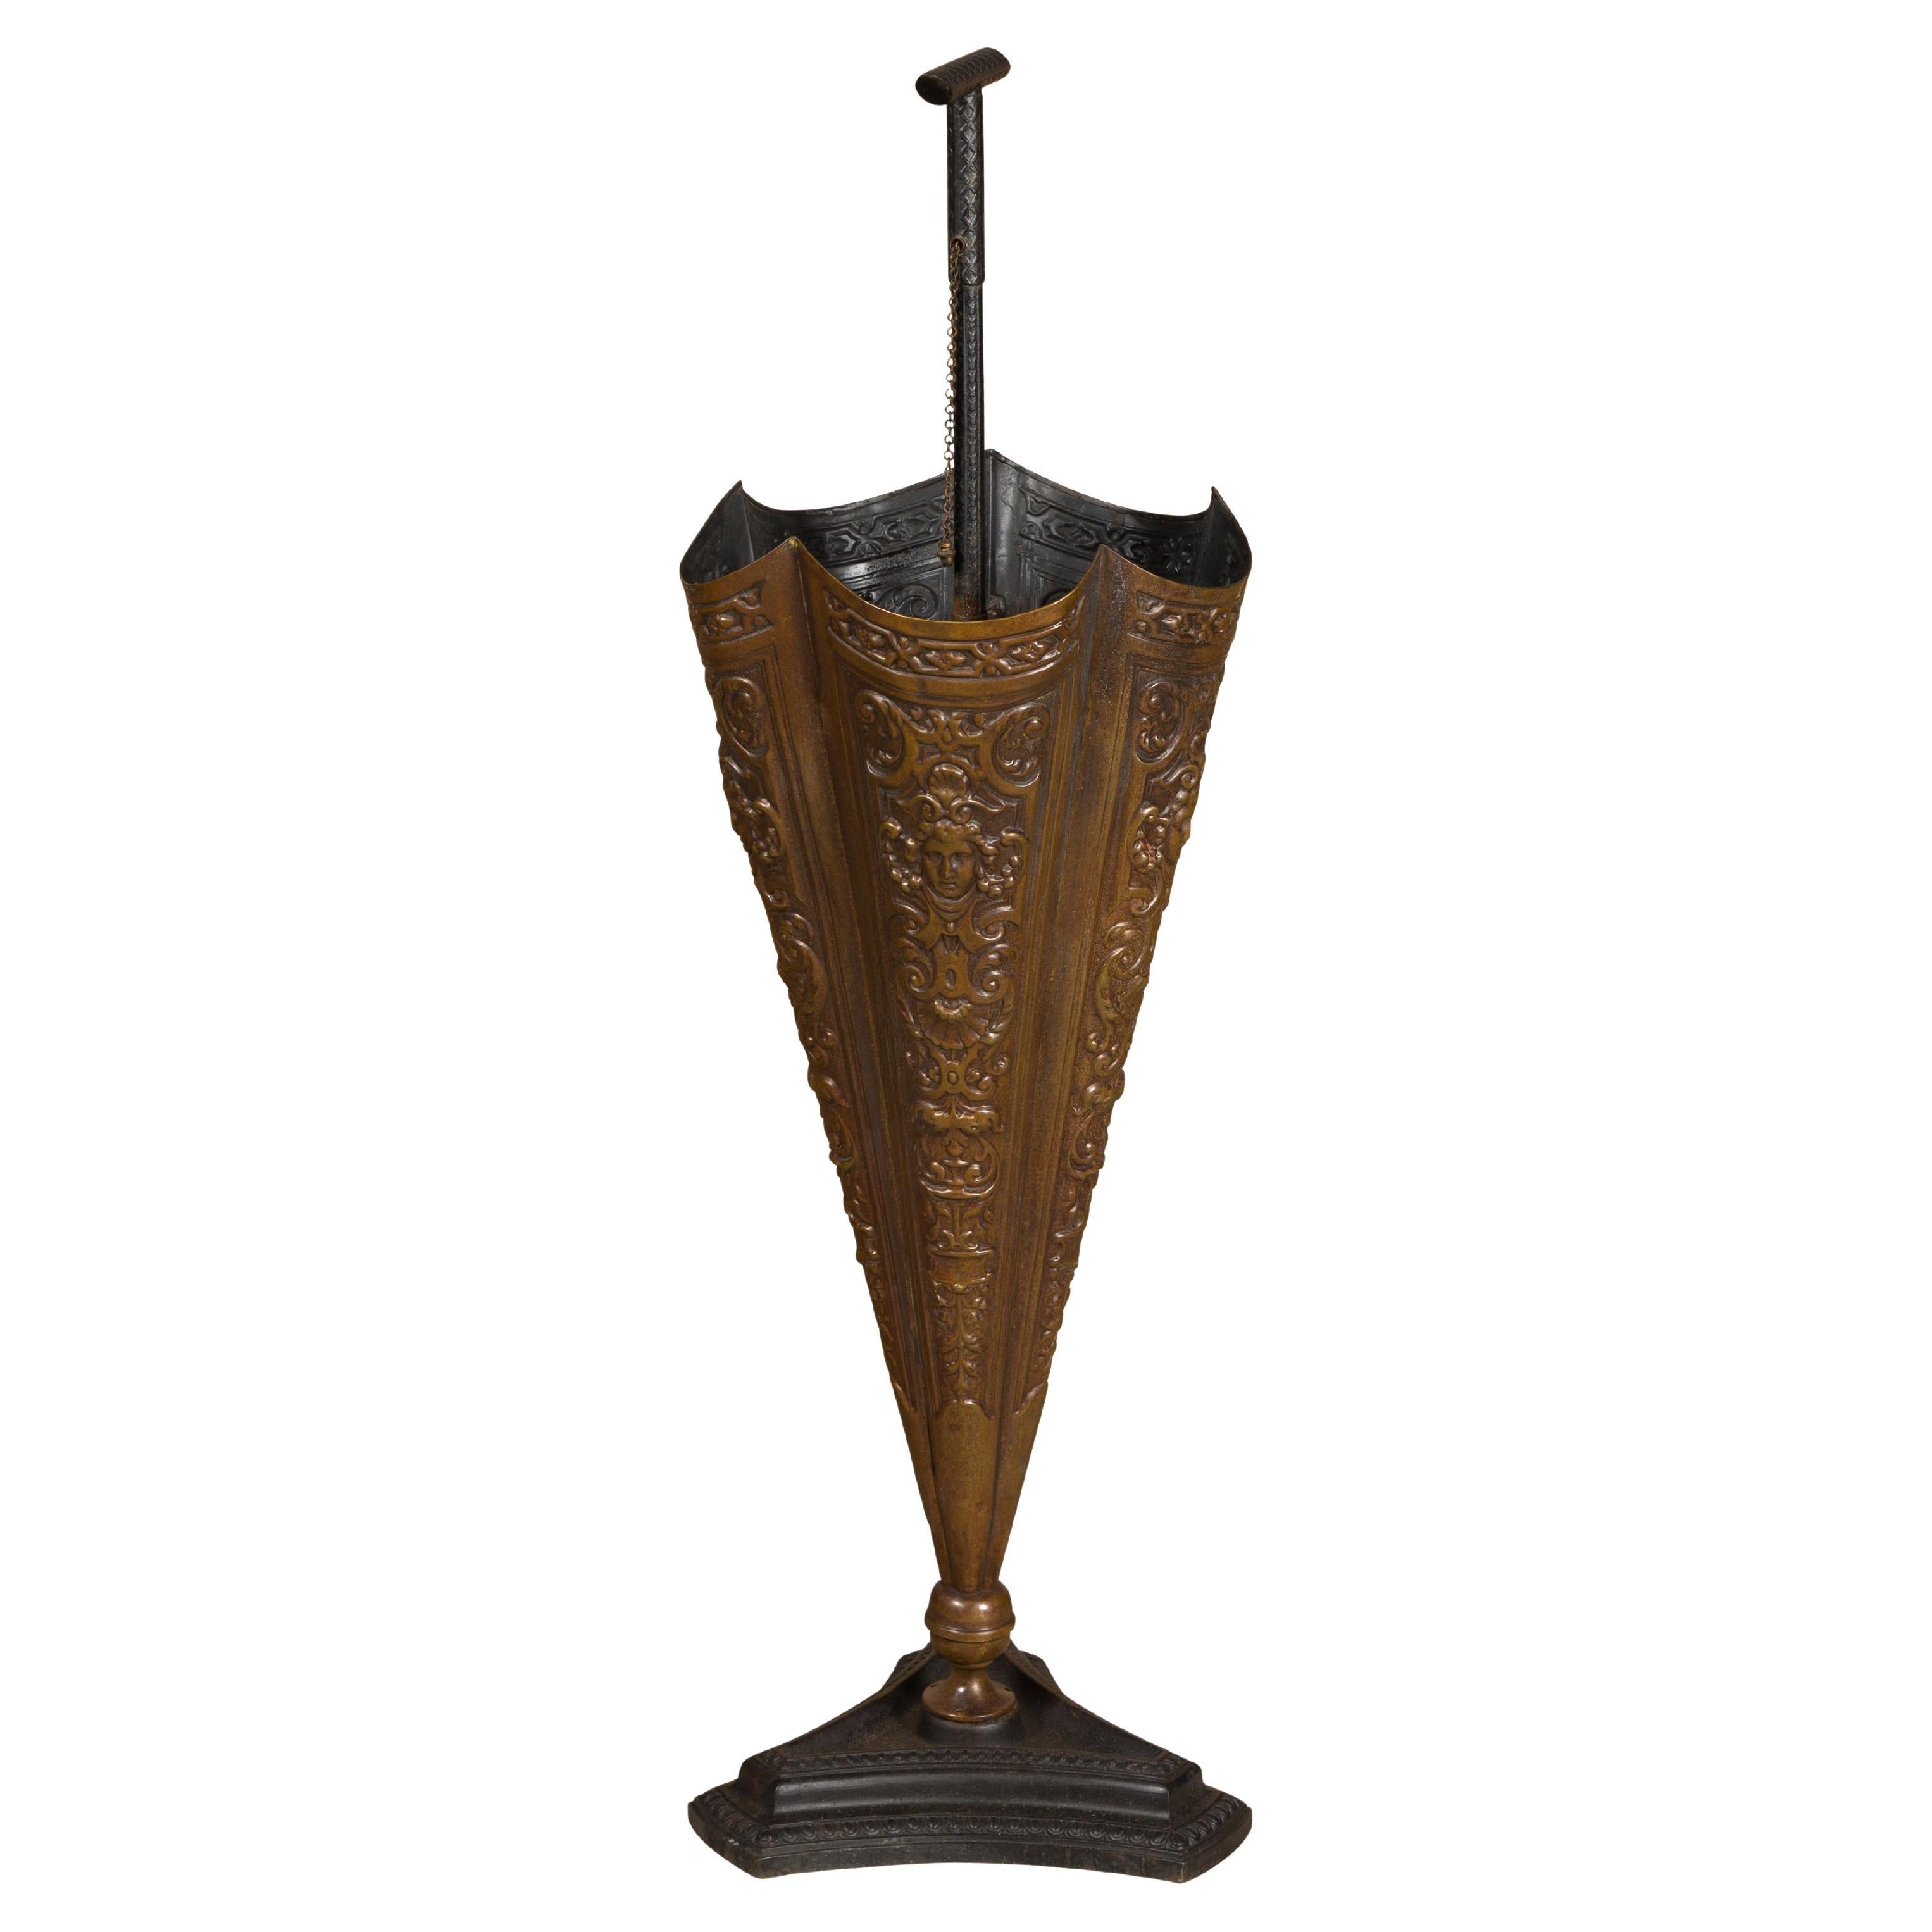 English 1920-1930 Brass Umbrella Stand with Raised Motifs and Tripartite Base For Sale